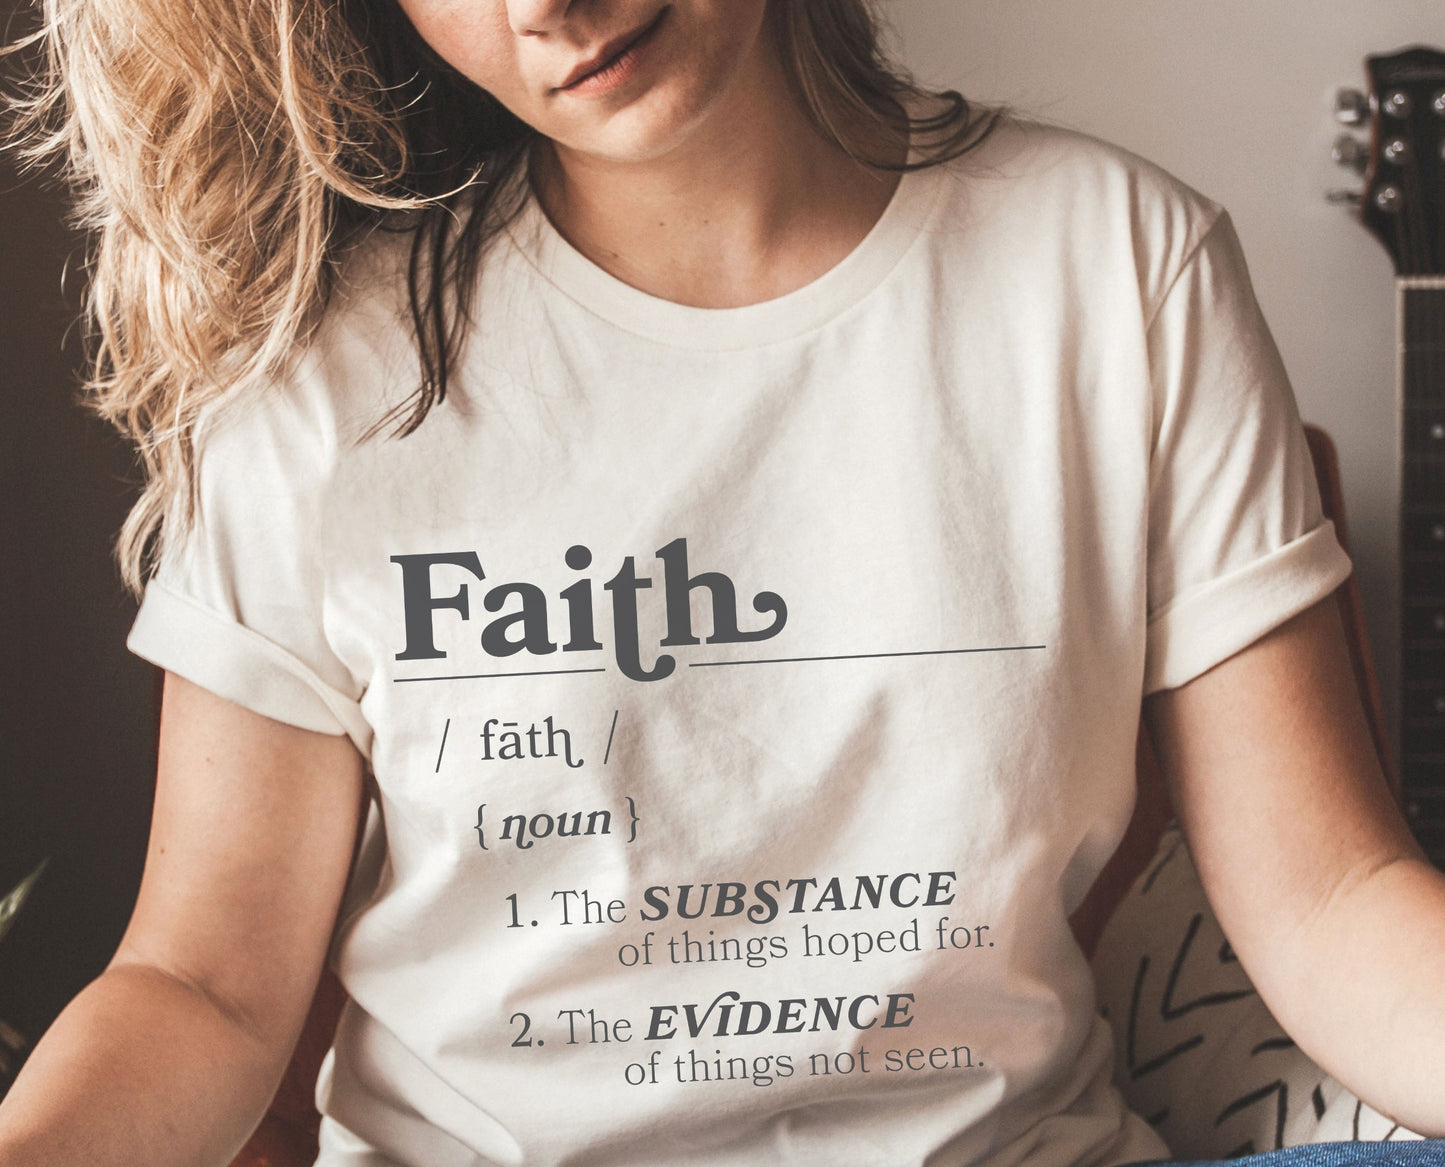 Faith Definition Hebrews 11:1 Christian aesthetic design printed in charcoal gray on soft cream unisex t-shirt for women and men